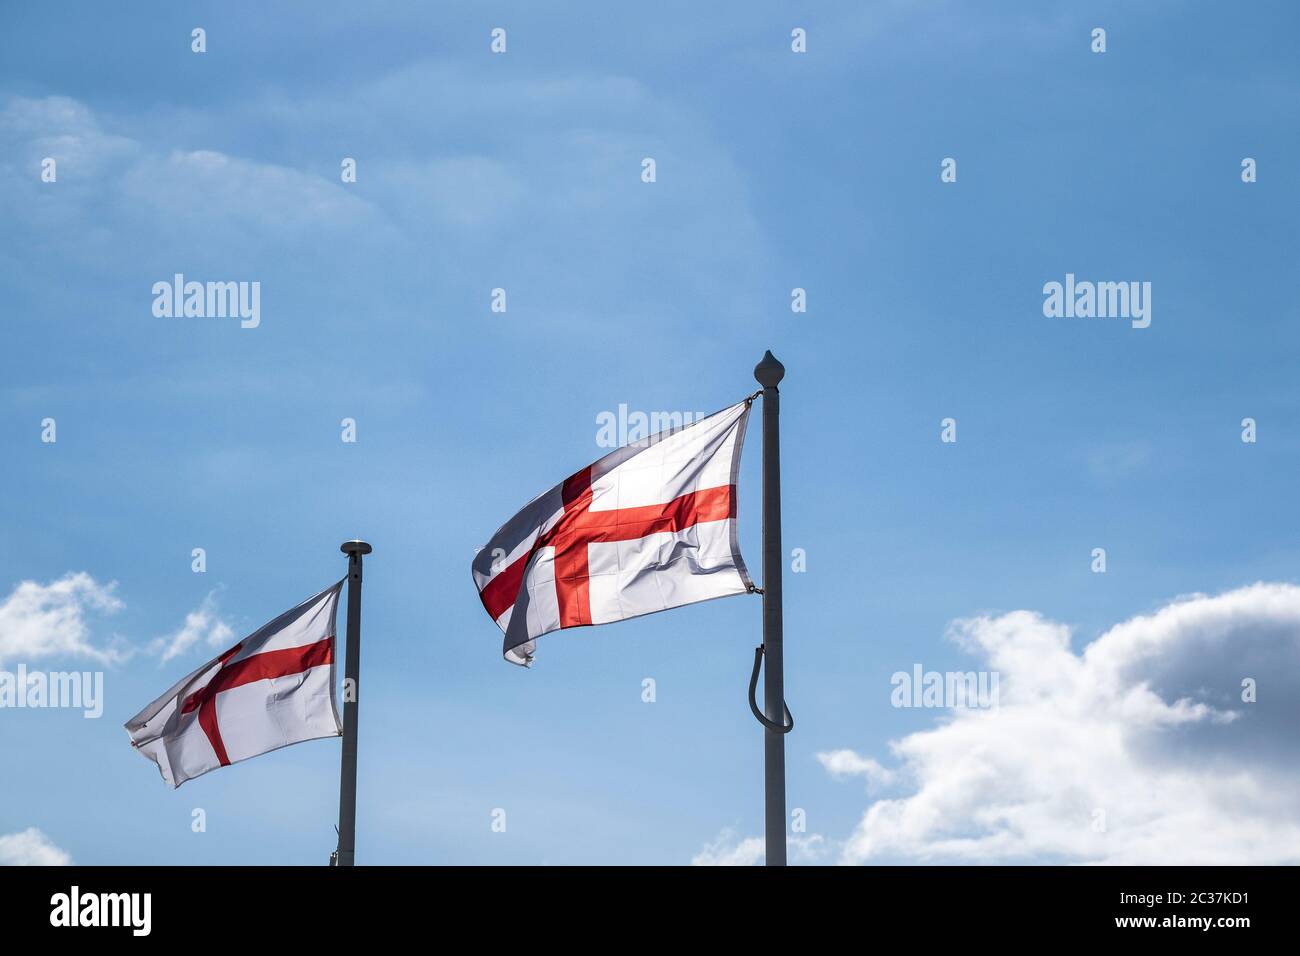 Flags of the Cross of St George fluttering in the wind. Stock Photo